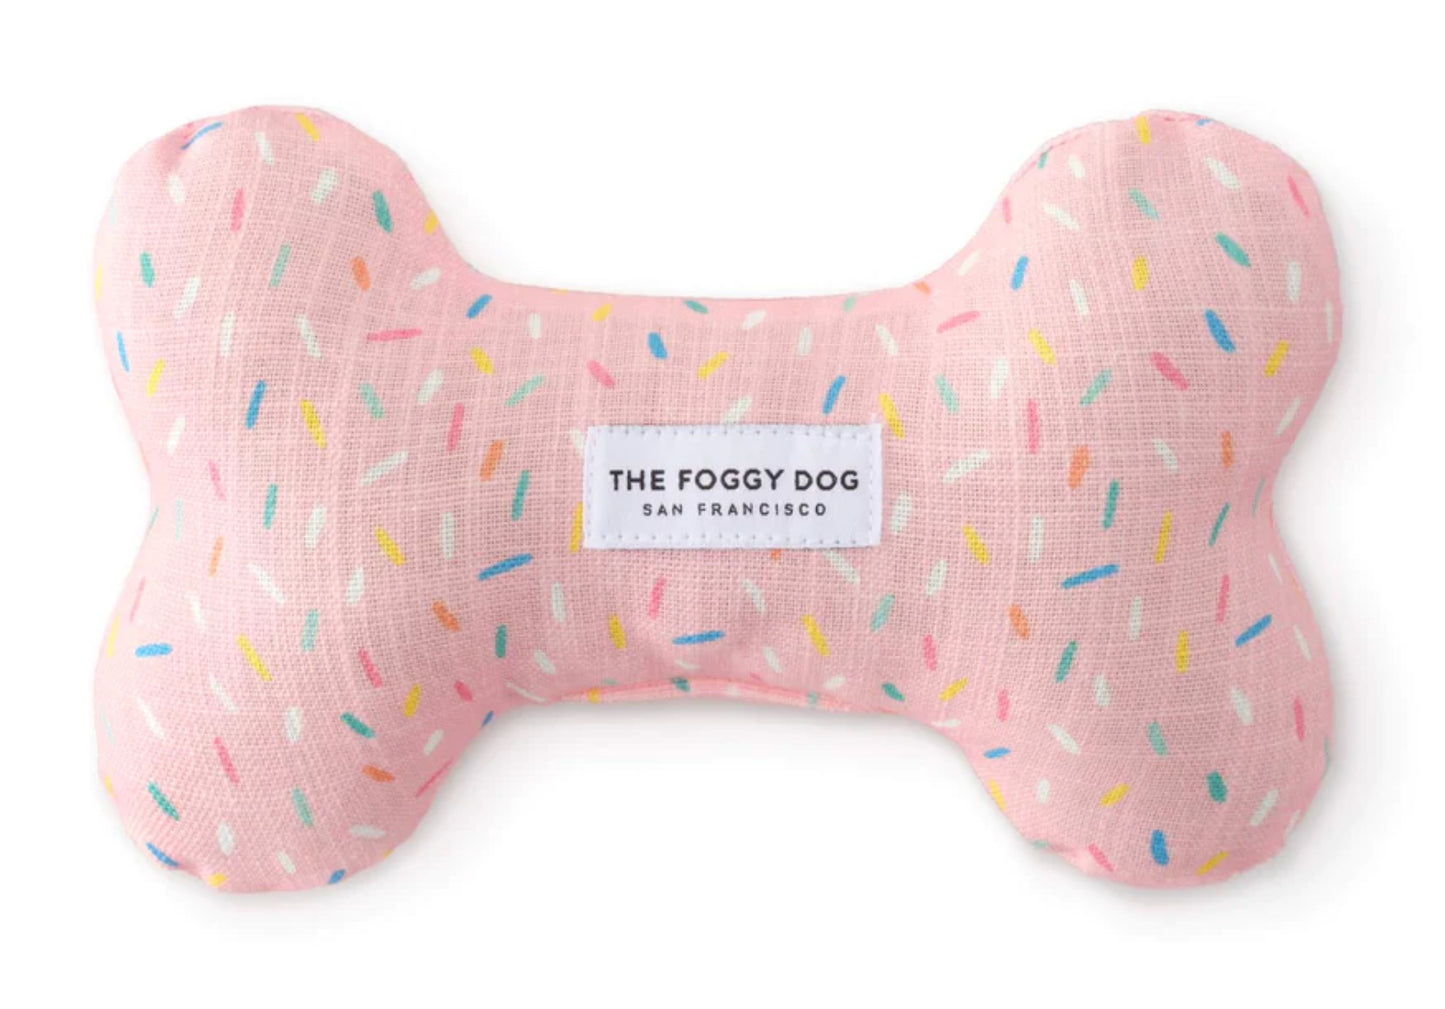 The Foggy Dog Squeaky Toy